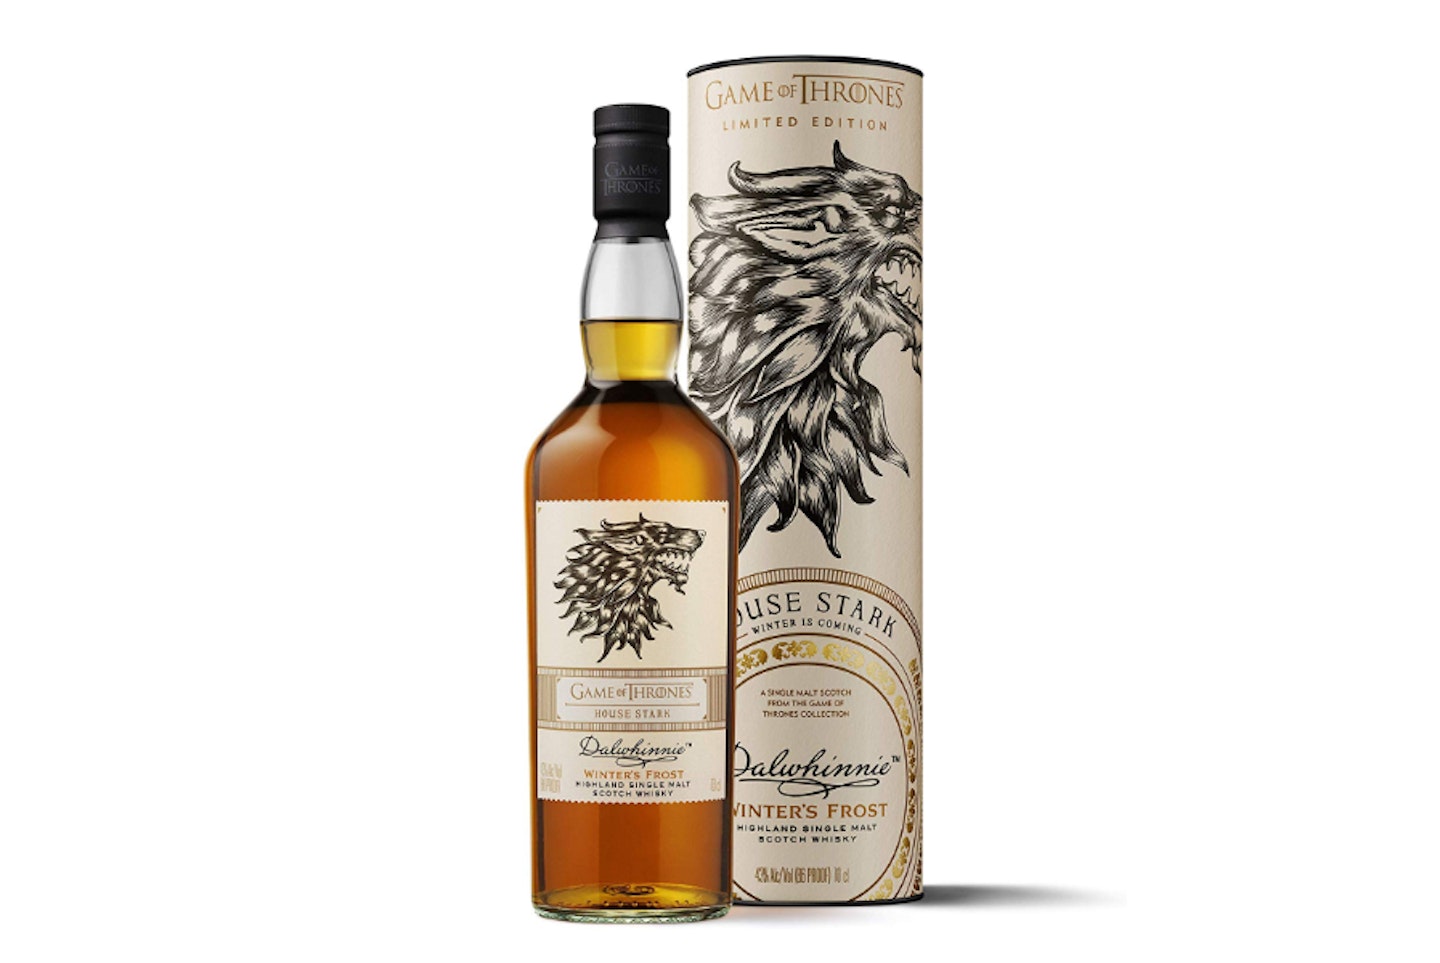 Game of Thrones House Stark – Dalwhinnie Winteru2019s Frost 700cl 43%, £48